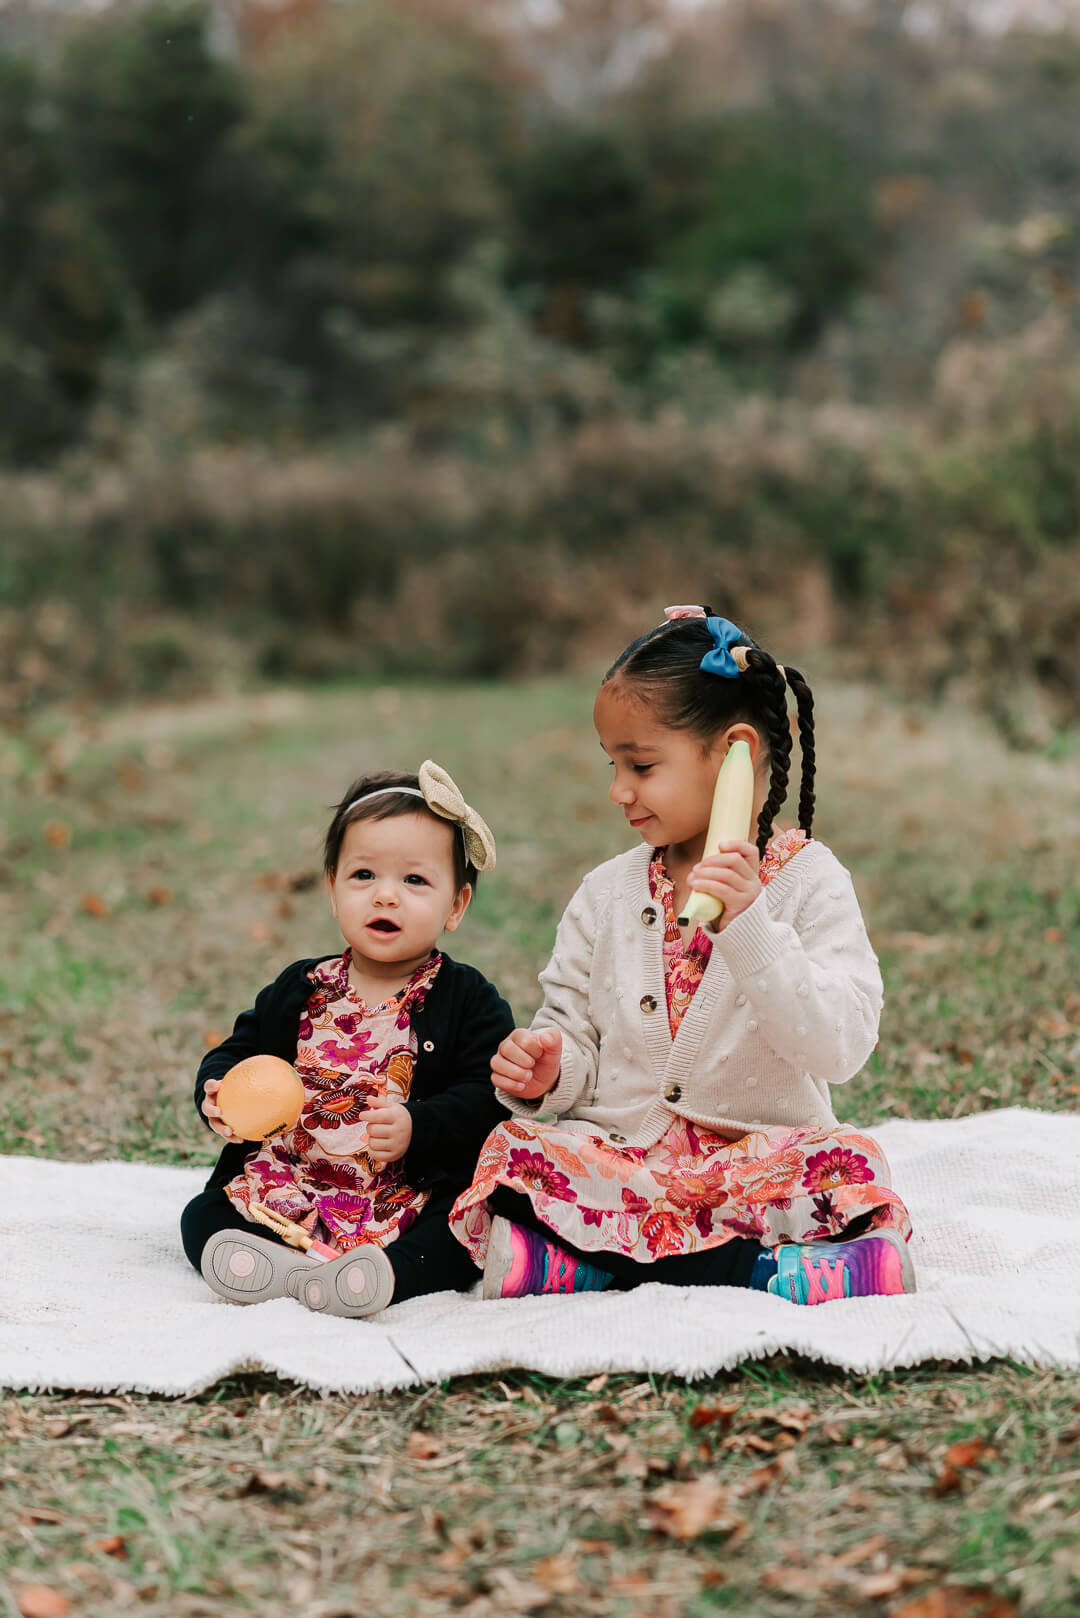 Two toddler sisters in matching pink floral dresses sit on a picnic blanket in a park playing with fruit